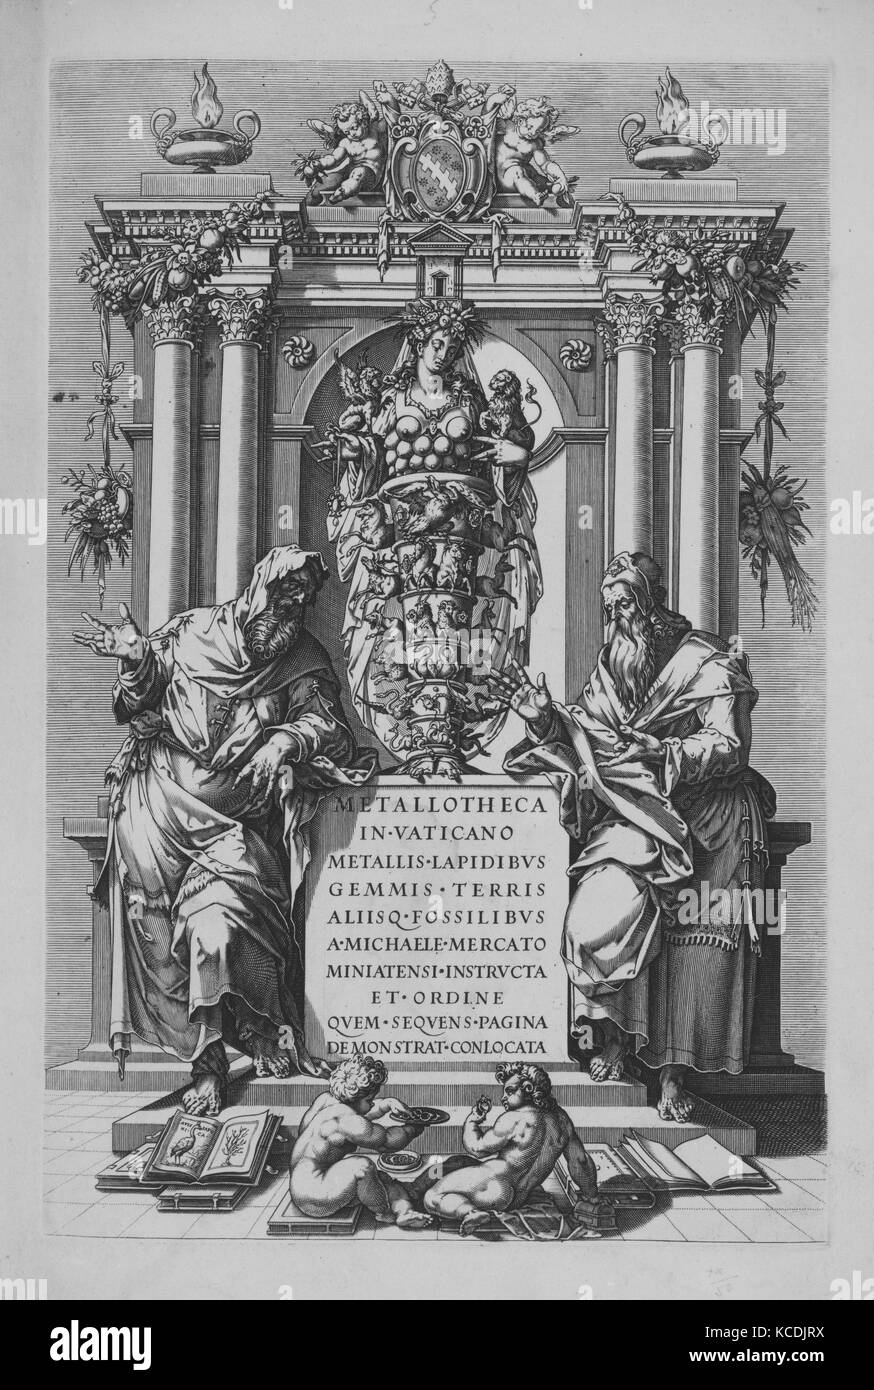 Tomb and Medals of Pope Sixtus V, Engraved by Matthaeus Greuter, 1630 Stock Photo